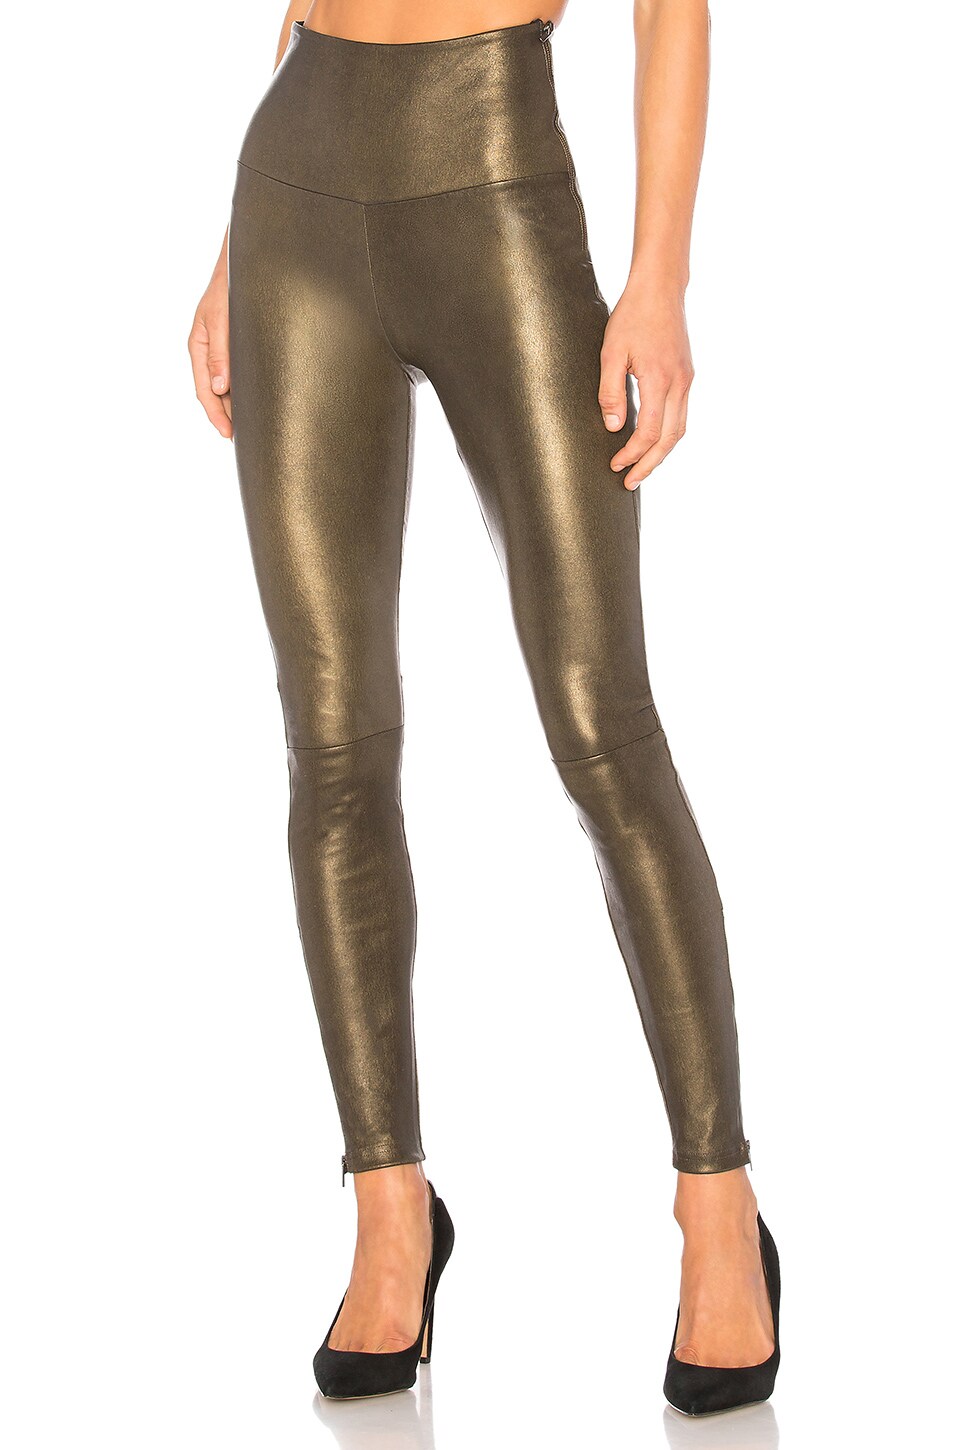 High Waisted Band Leggings With Zippers